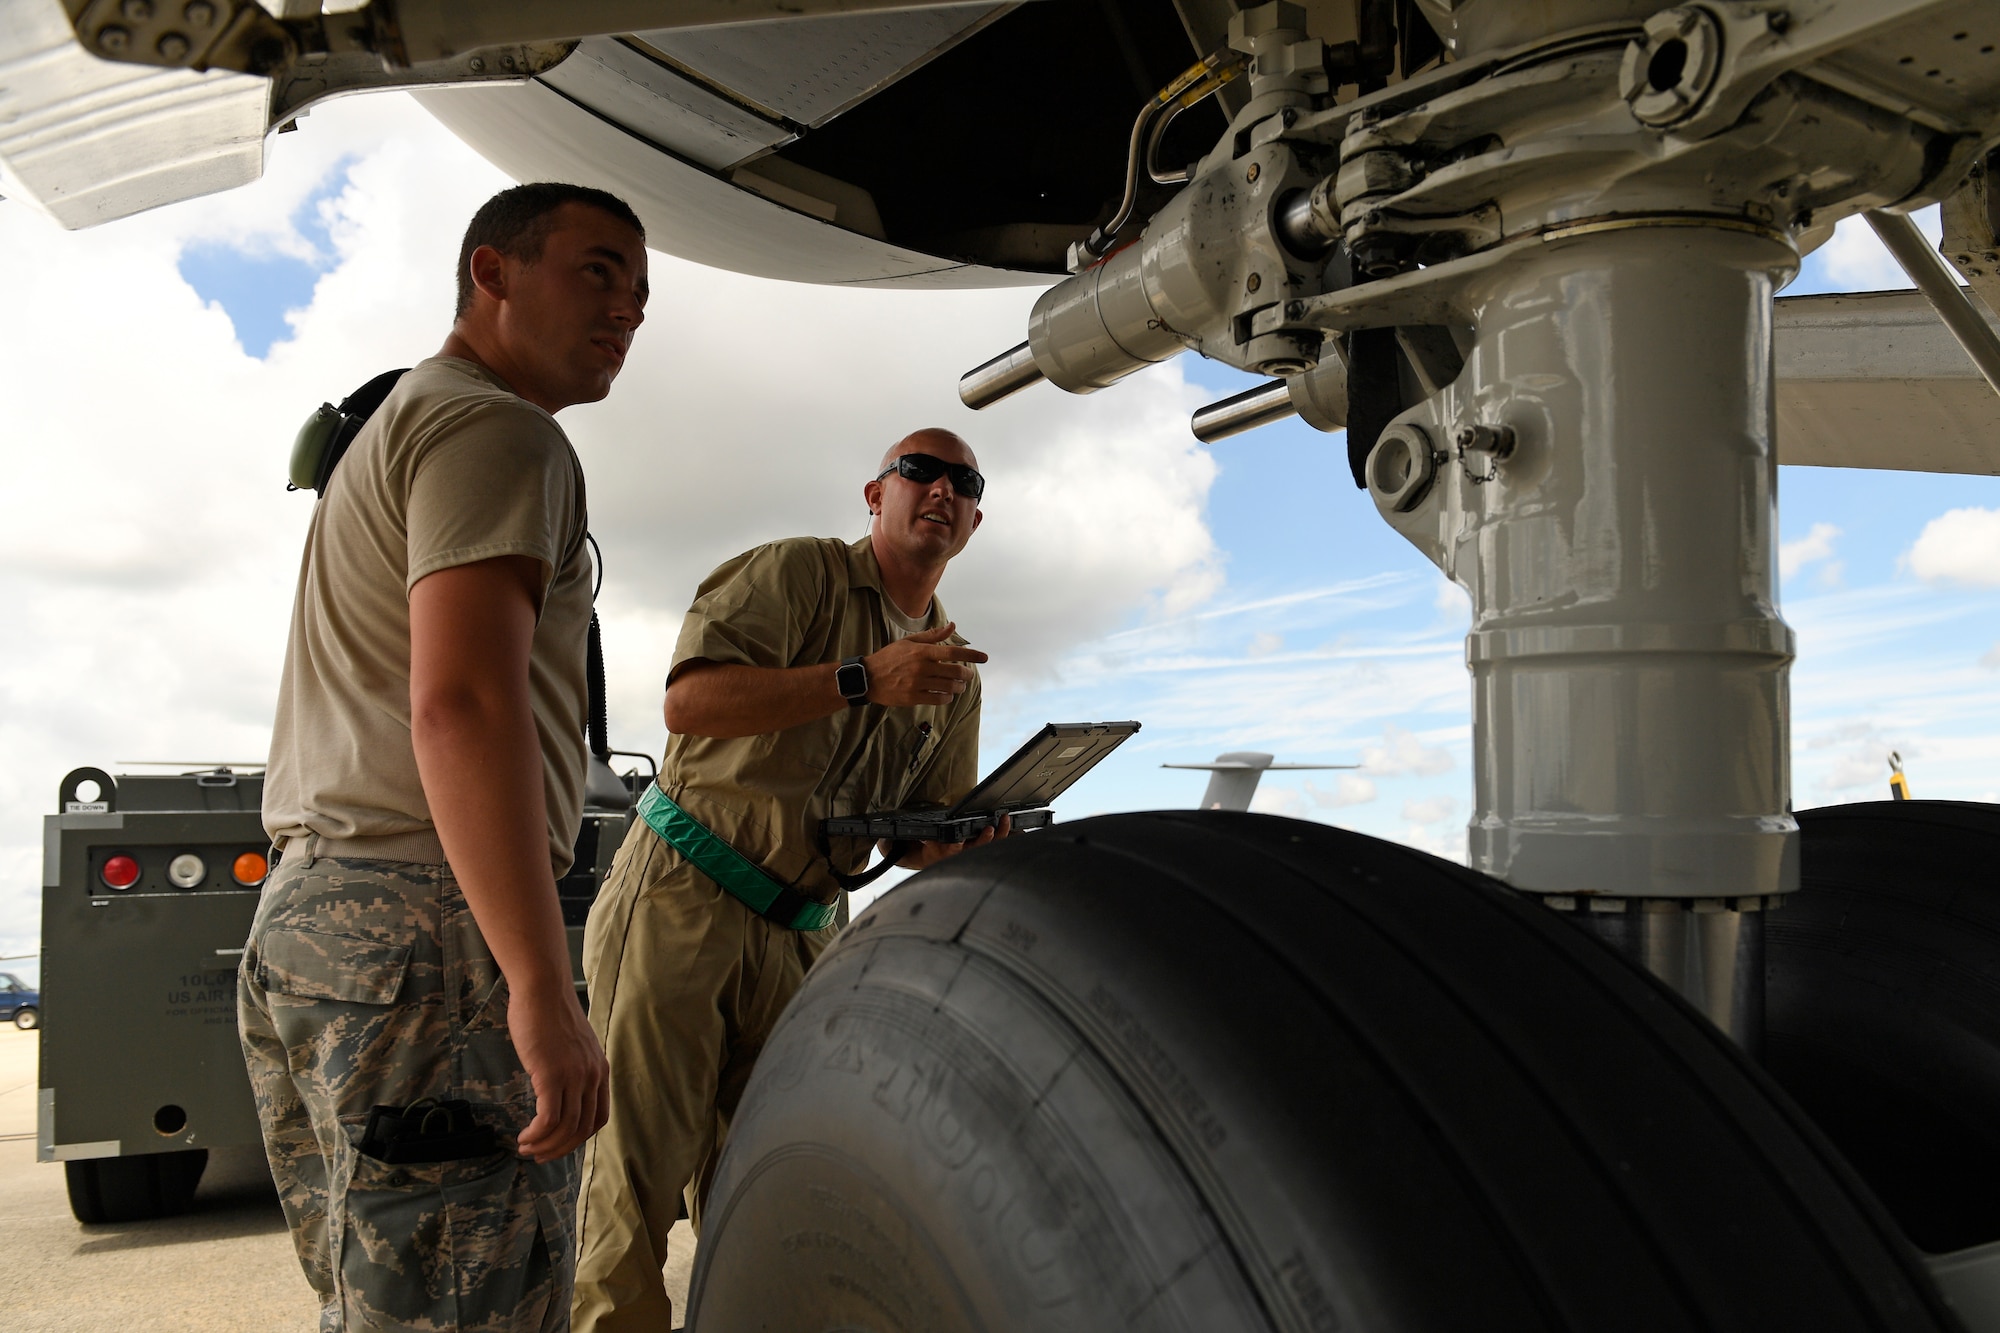 U.S. Air Force Tech. Sgt. Jason Smigelski (right) trains Airman 1st Class Wayne Chandler (left), both from the 145th Aircraft Maintenance Squadron (AMXS), on the proper procedure for connecting a tow bar to a C-17 Globemaster III aircraft at the the North Carolina Air National Guard Base, Charlotte Douglas International Airport, July 24, 2018. Since the aircraft conversion in April, the 145th AMXS is working to train maintenance personnel with a goal of them being fully qualified.